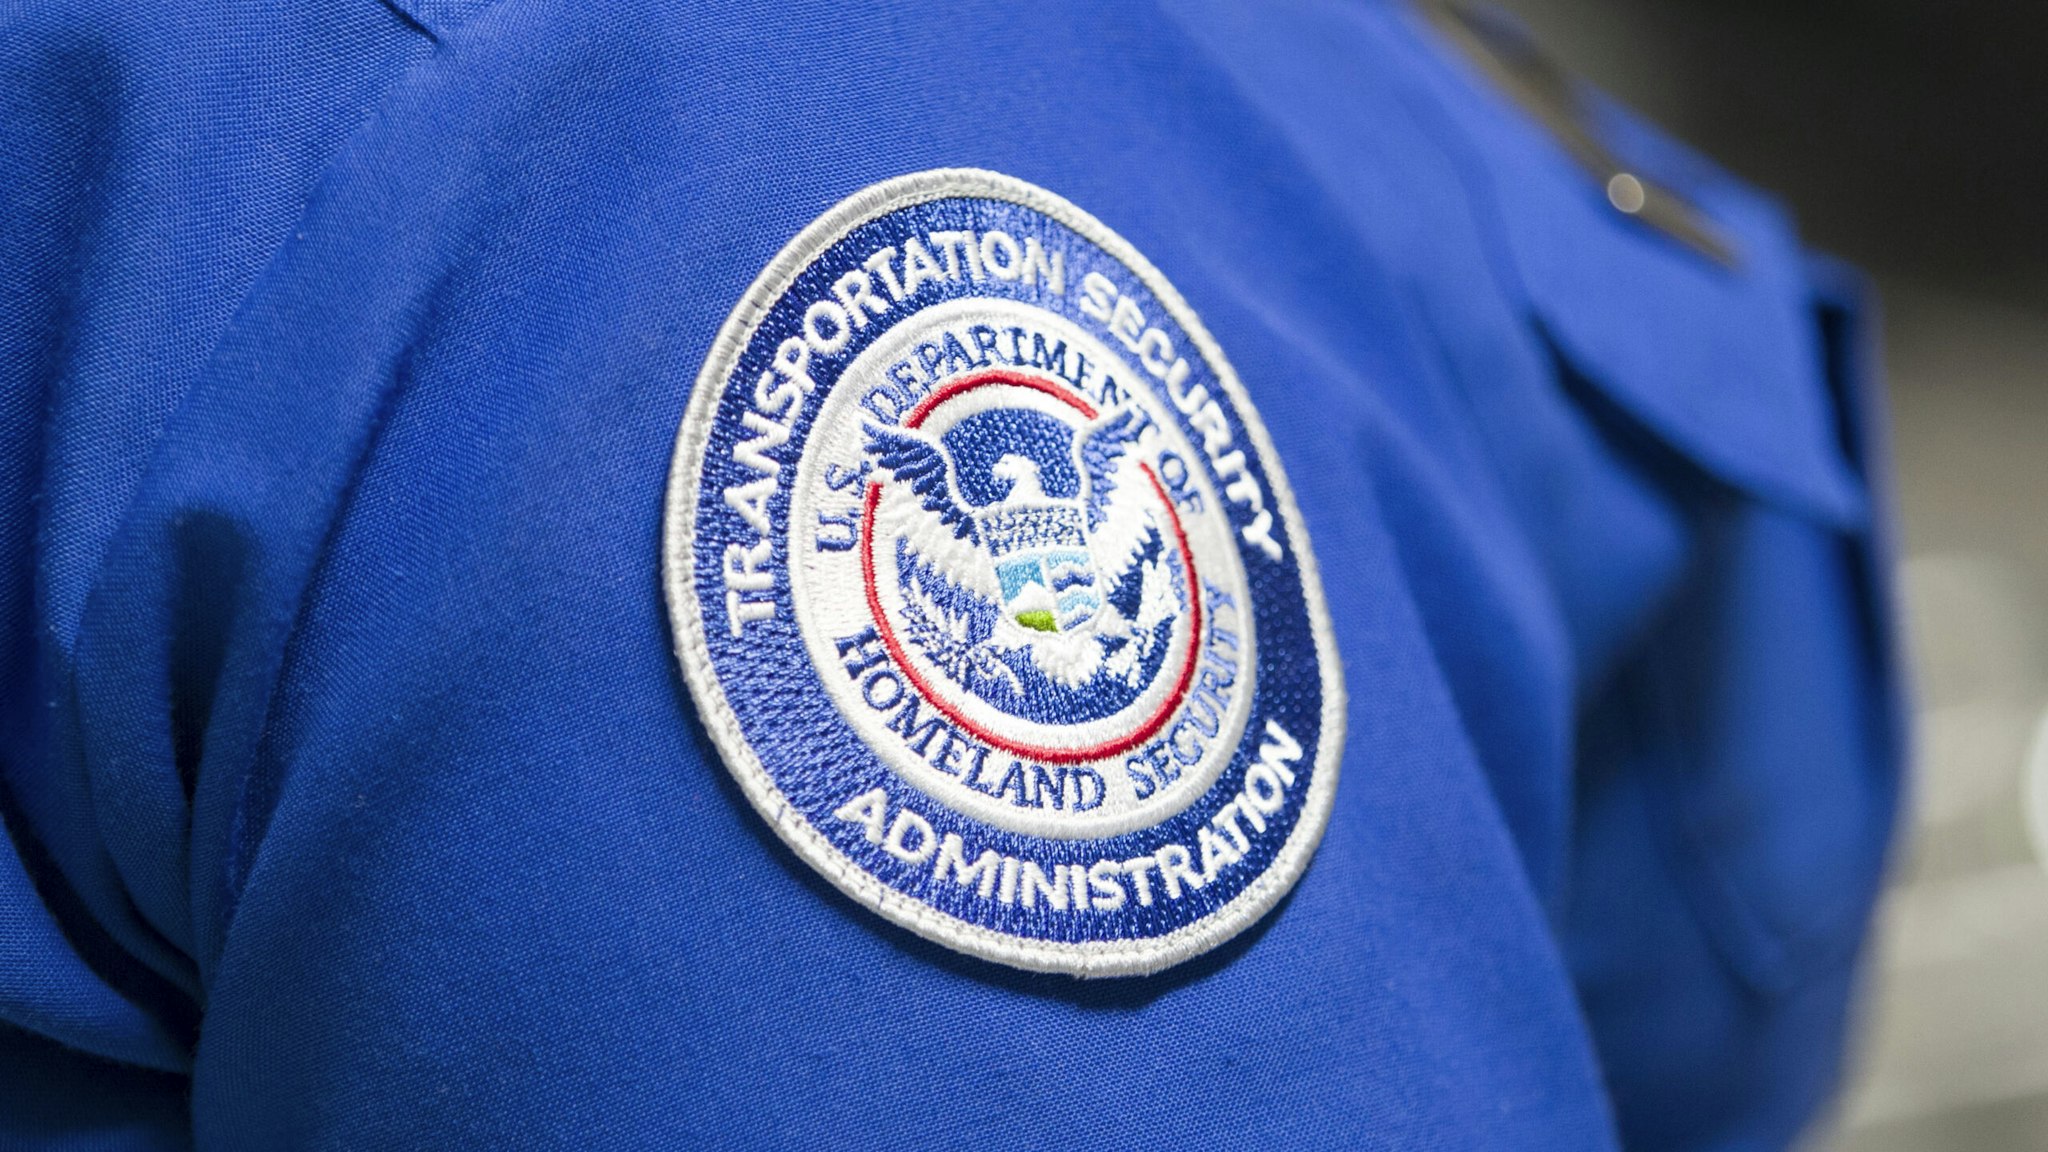 MIAMI, FLORIDA - MAY 21: A Transportation Security Administration (TSA) agent's patch is seen as she helps travelers place their bags through the 3-D scanner at the Miami International Airport on May 21, 2019 in Miami, Florida. TSA has begun using the new 3-D computed tomography (CT) scanner in a checkpoint lane to detect explosives and other prohibited items that may be inside carry-on bags.